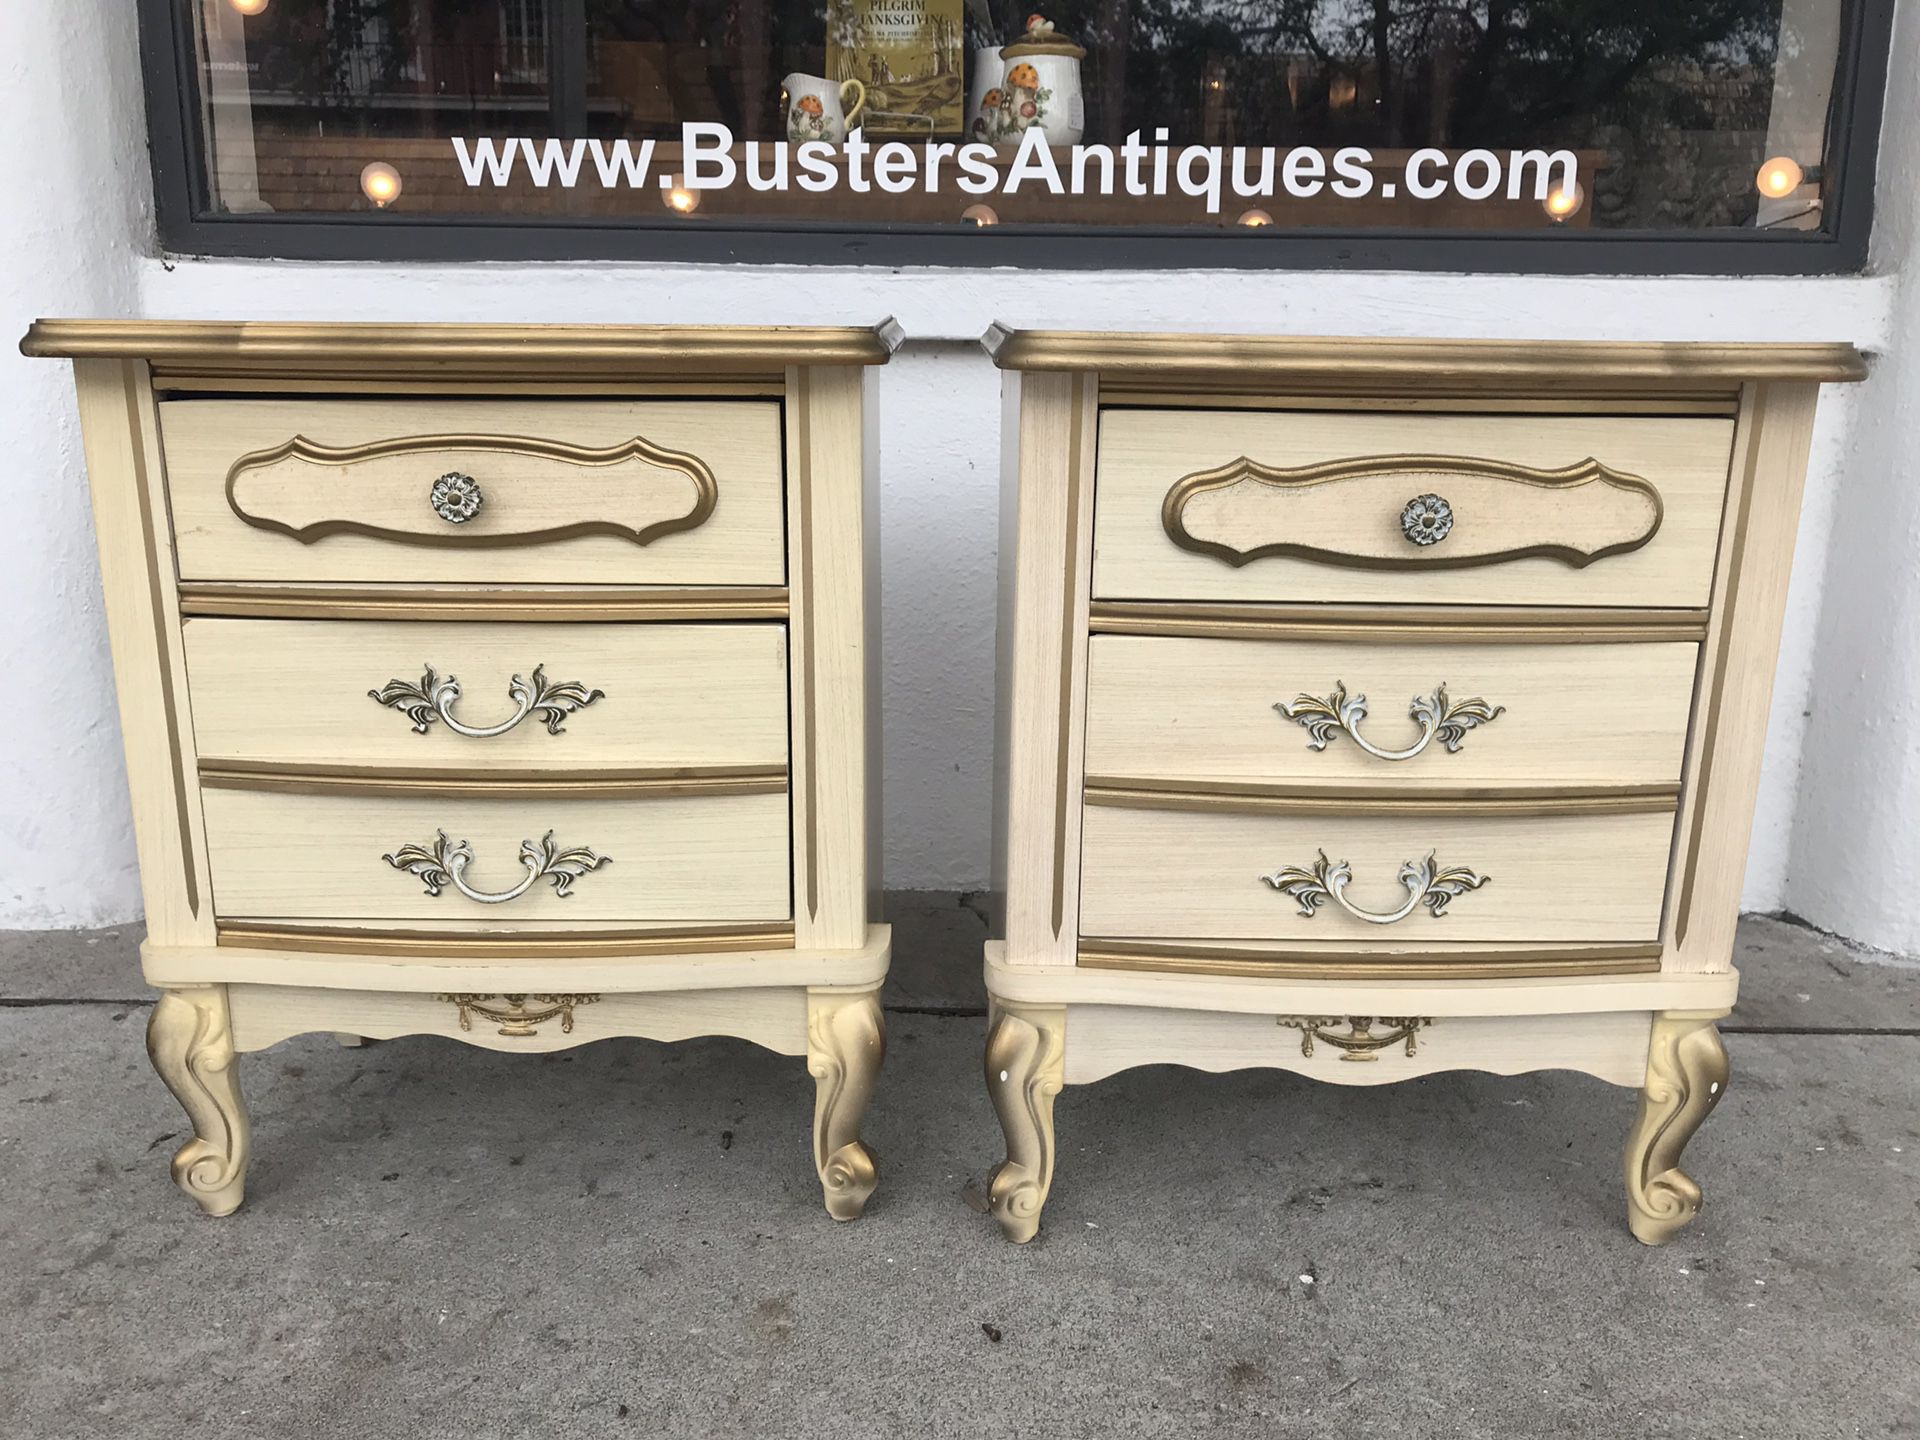 Pair Of Vintage Sears “Bonnet” French Provincial Nightstands